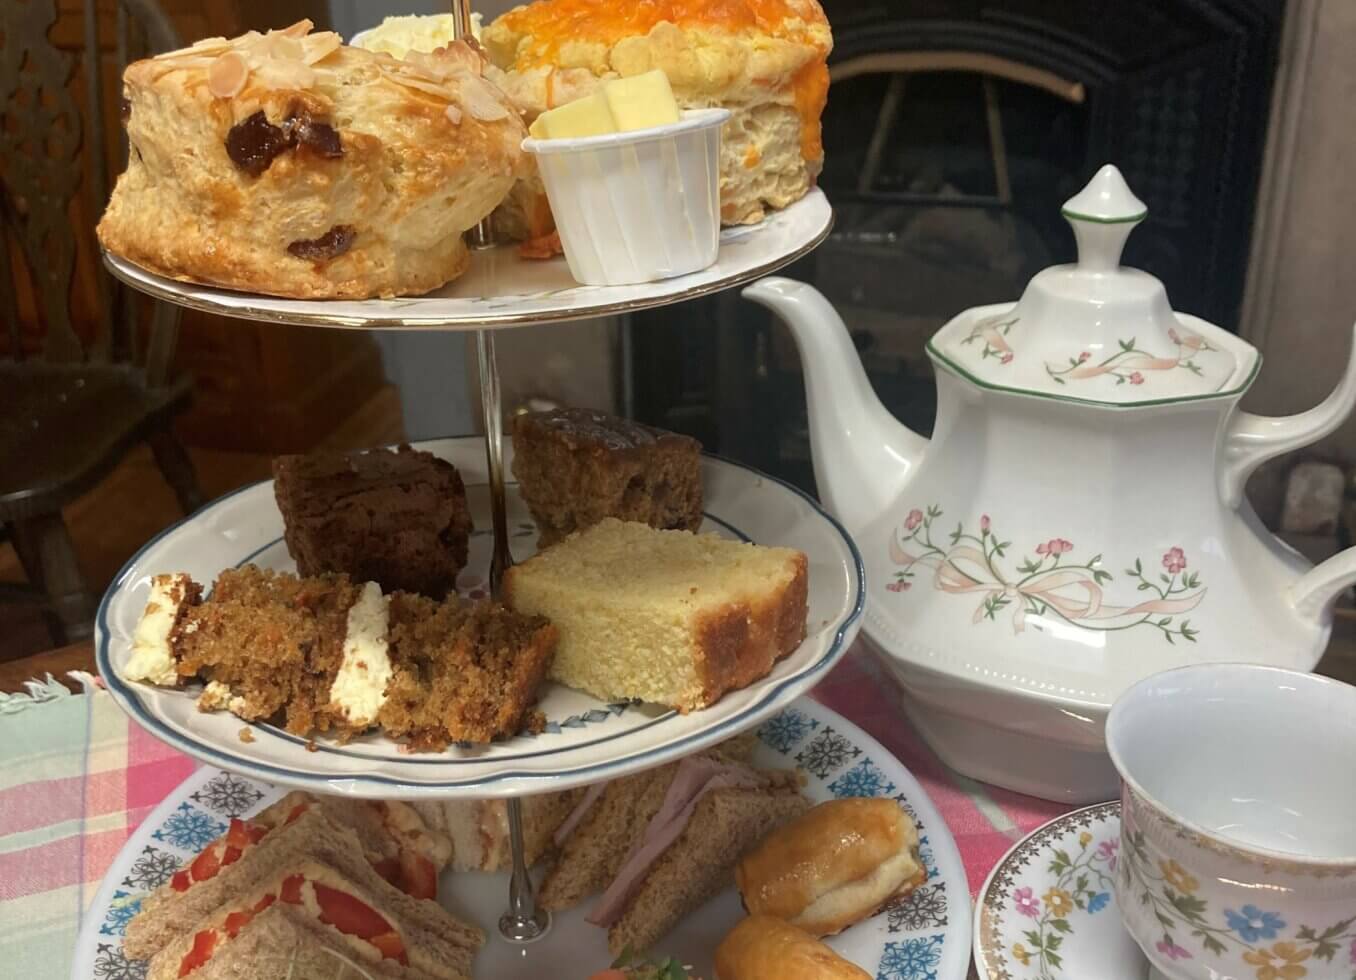 Join us for an Afternoon Tea!